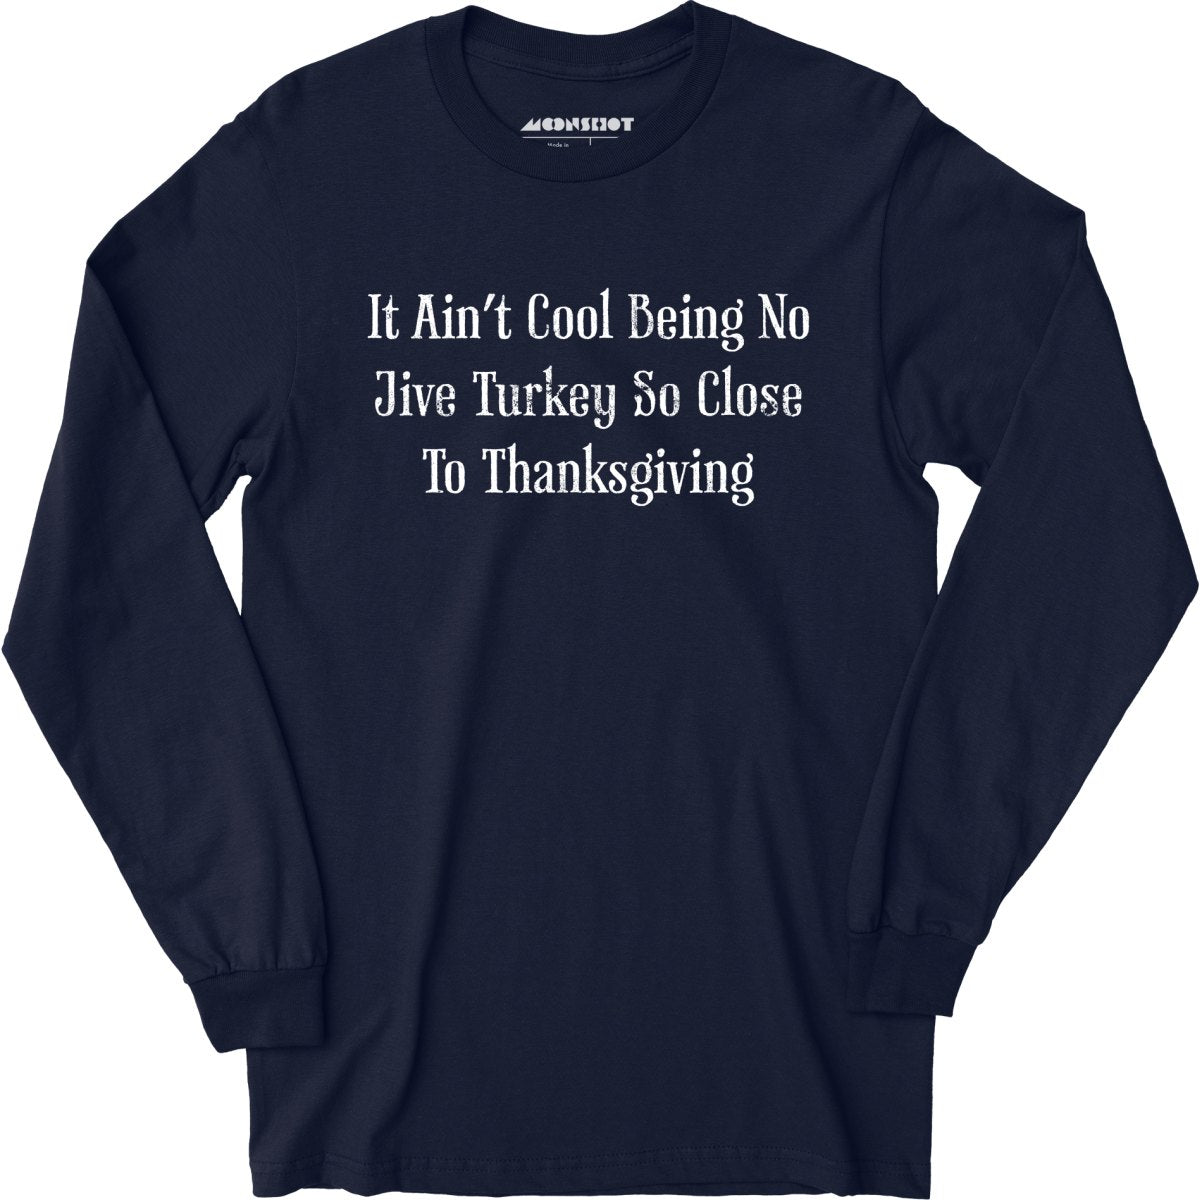 It Ain't Cool Being No Jive Turkey So Close to Thanksgiving - Long Sleeve T-Shirt